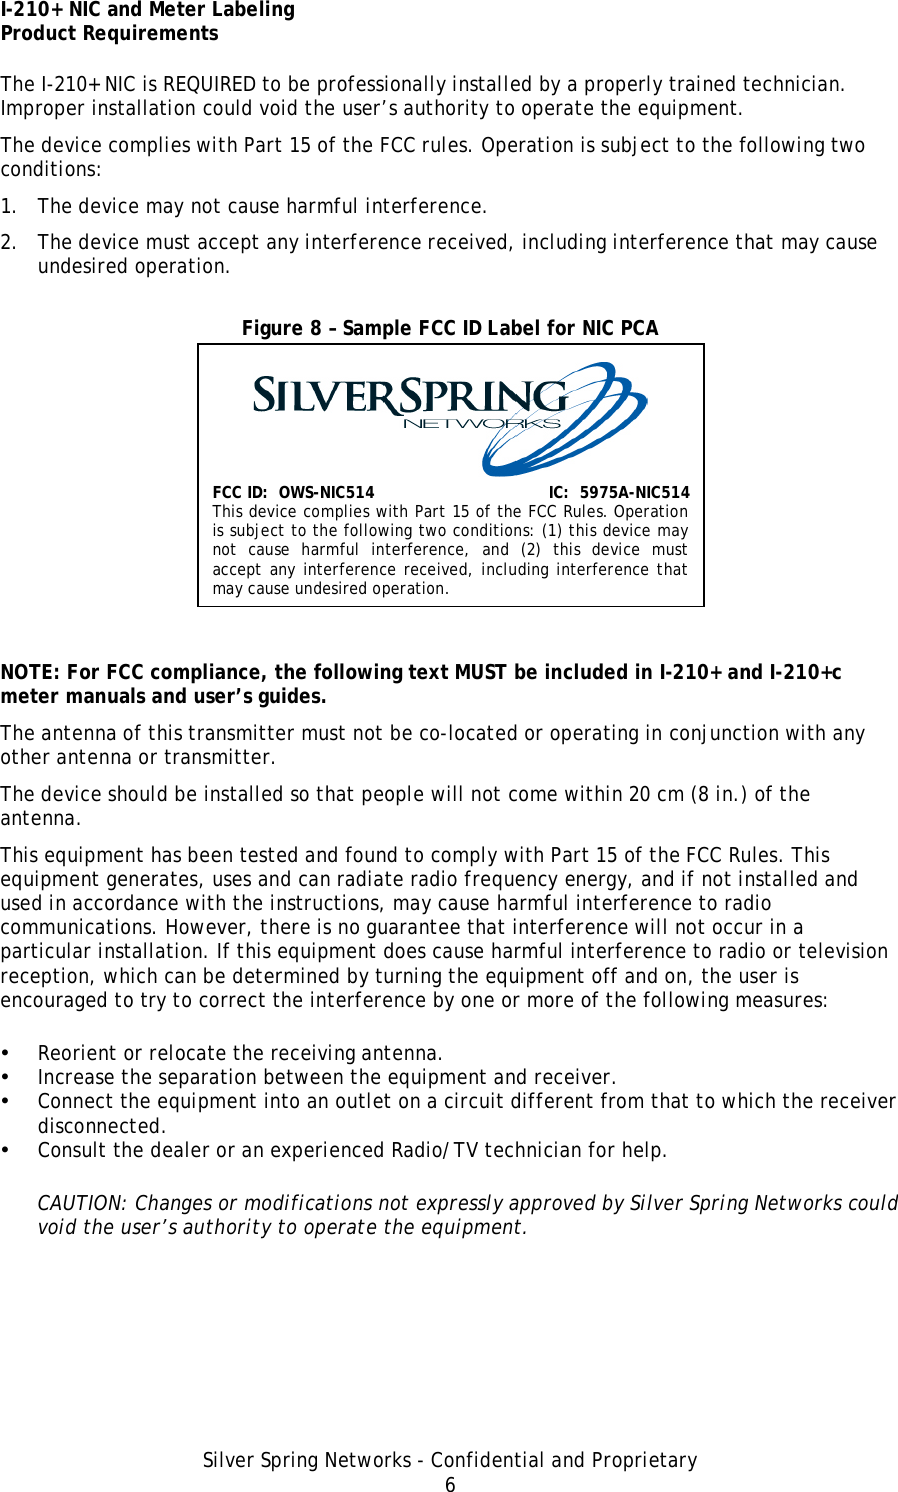 I-210+ NIC and Meter Labeling Product Requirements Silver Spring Networks - Confidential and Proprietary 6 The I-210+ NIC is REQUIRED to be professionally installed by a properly trained technician. Improper installation could void the user’s authority to operate the equipment. The device complies with Part 15 of the FCC rules. Operation is subject to the following two conditions: 1. The device may not cause harmful interference. 2. The device must accept any interference received, including interference that may cause undesired operation. Figure 8 – Sample FCC ID Label for NIC PCA   NOTE: For FCC compliance, the following text MUST be included in I-210+ and I-210+c meter manuals and user’s guides. The antenna of this transmitter must not be co-located or operating in conjunction with any other antenna or transmitter. The device should be installed so that people will not come within 20 cm (8 in.) of the antenna. This equipment has been tested and found to comply with Part 15 of the FCC Rules. This equipment generates, uses and can radiate radio frequency energy, and if not installed and used in accordance with the instructions, may cause harmful interference to radio communications. However, there is no guarantee that interference will not occur in a particular installation. If this equipment does cause harmful interference to radio or television reception, which can be determined by turning the equipment off and on, the user is encouraged to try to correct the interference by one or more of the following measures: • Reorient or relocate the receiving antenna. • Increase the separation between the equipment and receiver. • Connect the equipment into an outlet on a circuit different from that to which the receiver disconnected. • Consult the dealer or an experienced Radio/TV technician for help. CAUTION: Changes or modifications not expressly approved by Silver Spring Networks could void the user’s authority to operate the equipment. FCC ID:  OWS-NIC514  IC:  5975A-NIC514 This device complies with Part 15 of the FCC Rules. Operation is subject to the following two conditions: (1) this device may not cause harmful interference, and (2) this device must accept any interference received, including interference that may cause undesired operation. 